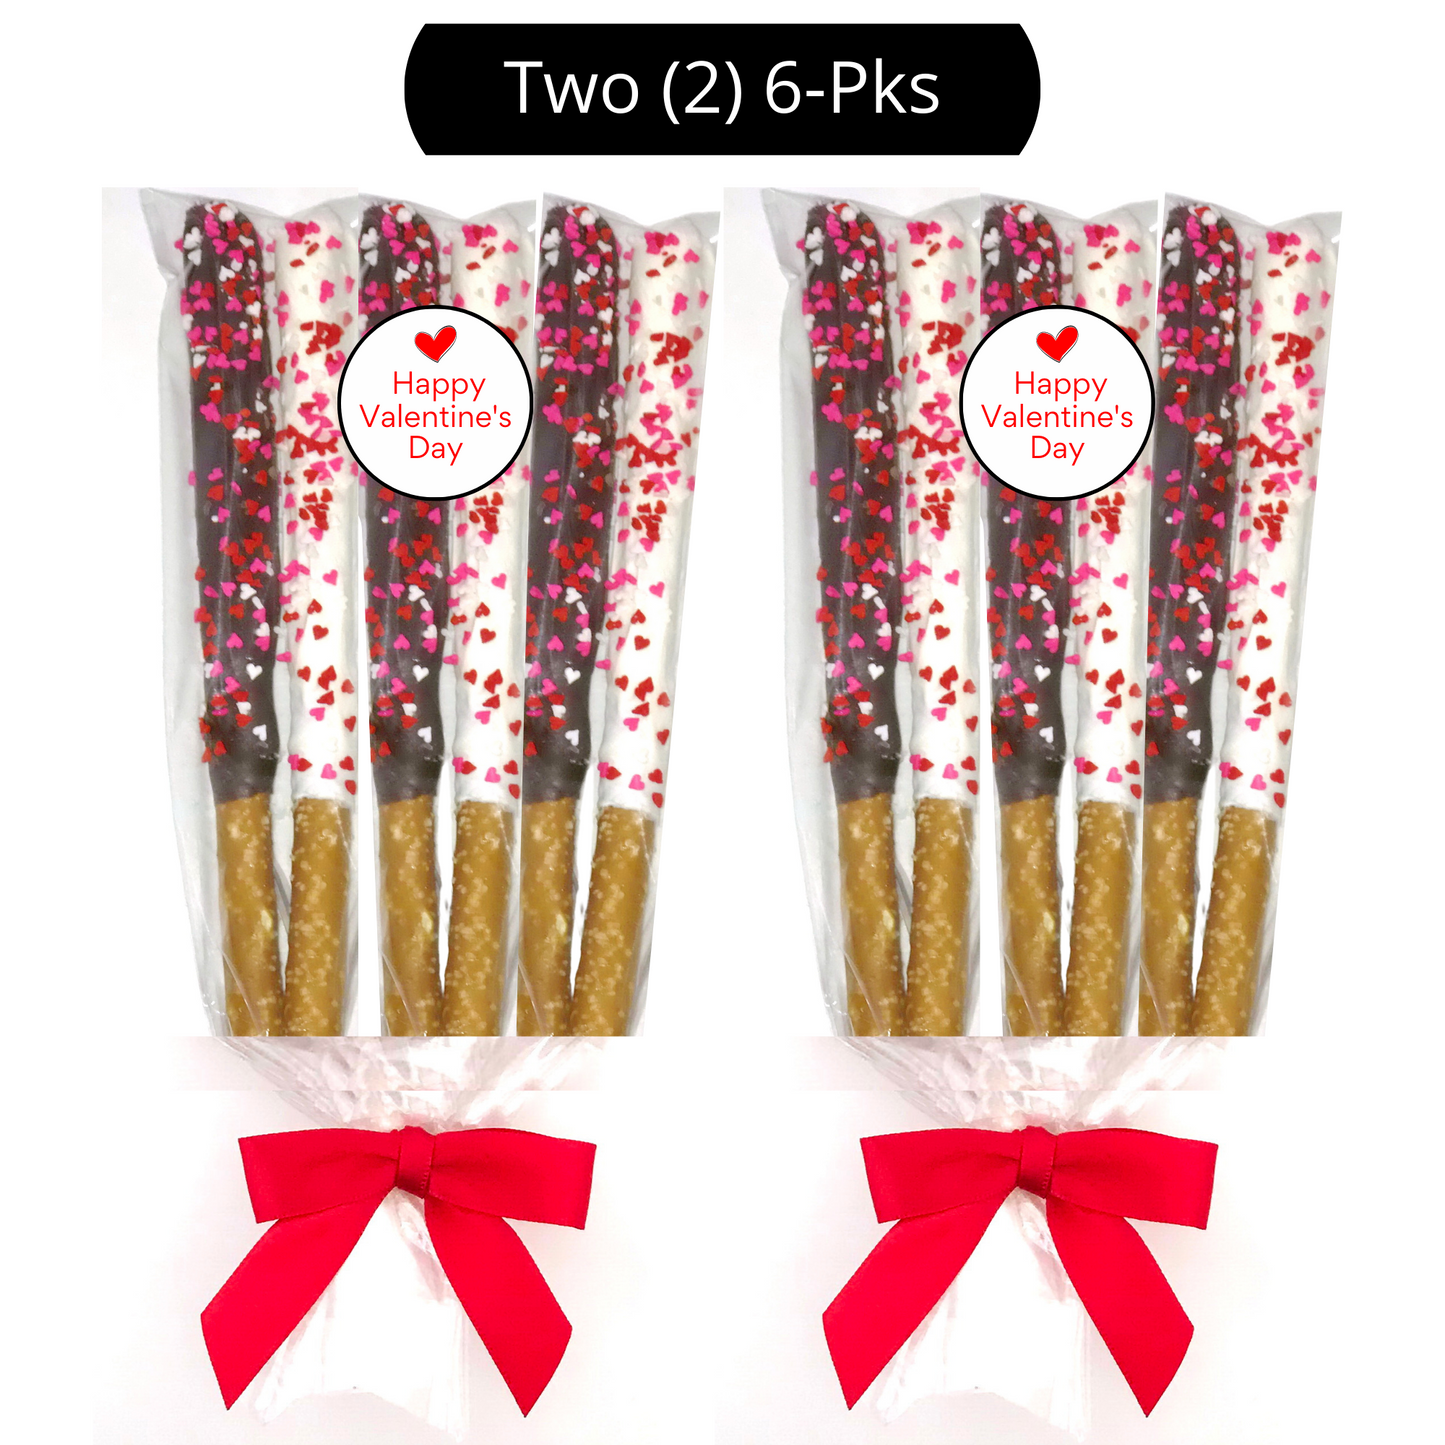 Valentine's Day Chocolate Pretzel Rods with Heart Sprinkles - Mixed Flavors